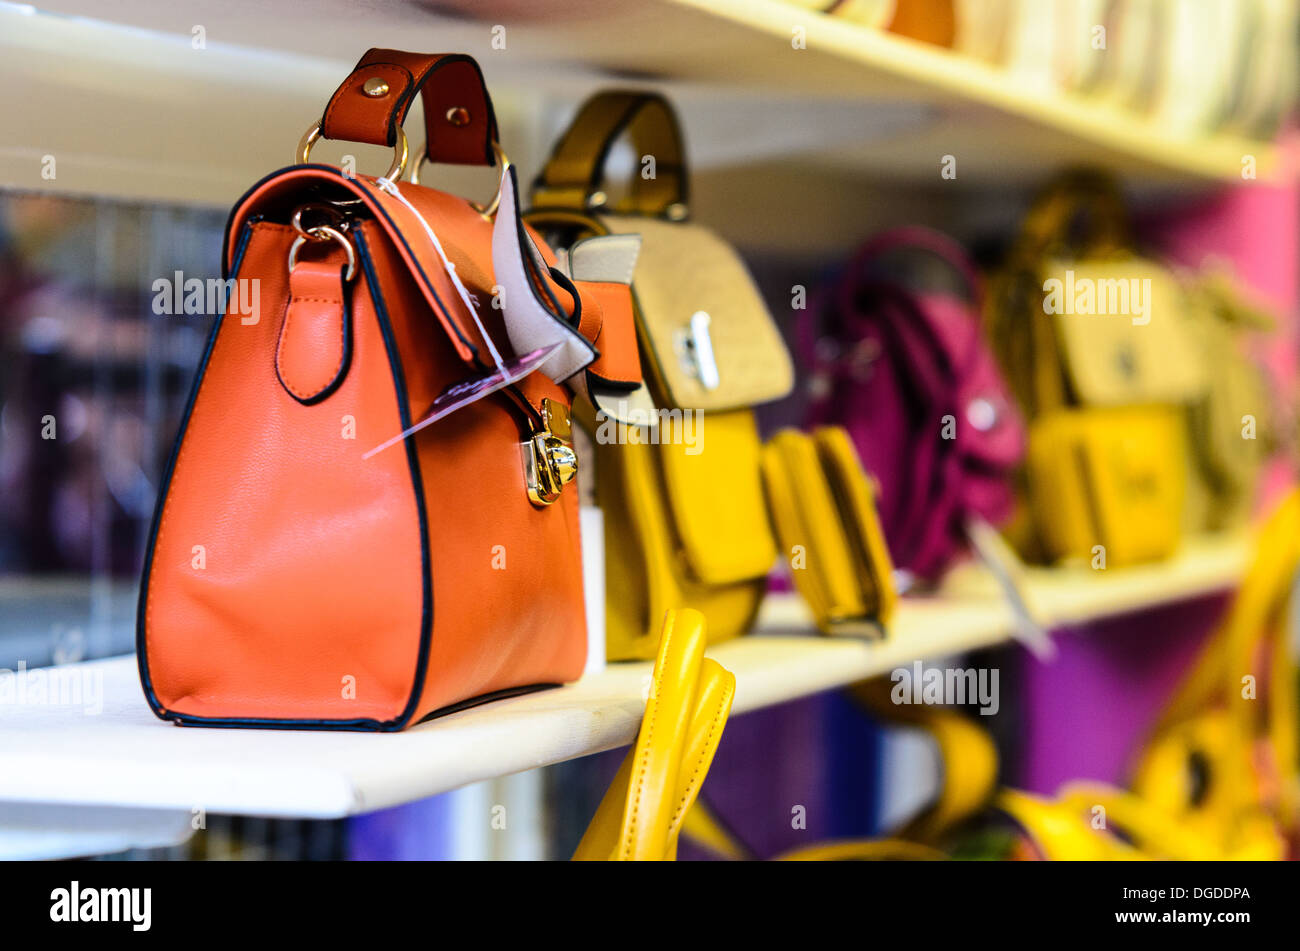 Handbags for sale in boutique Stock Photo